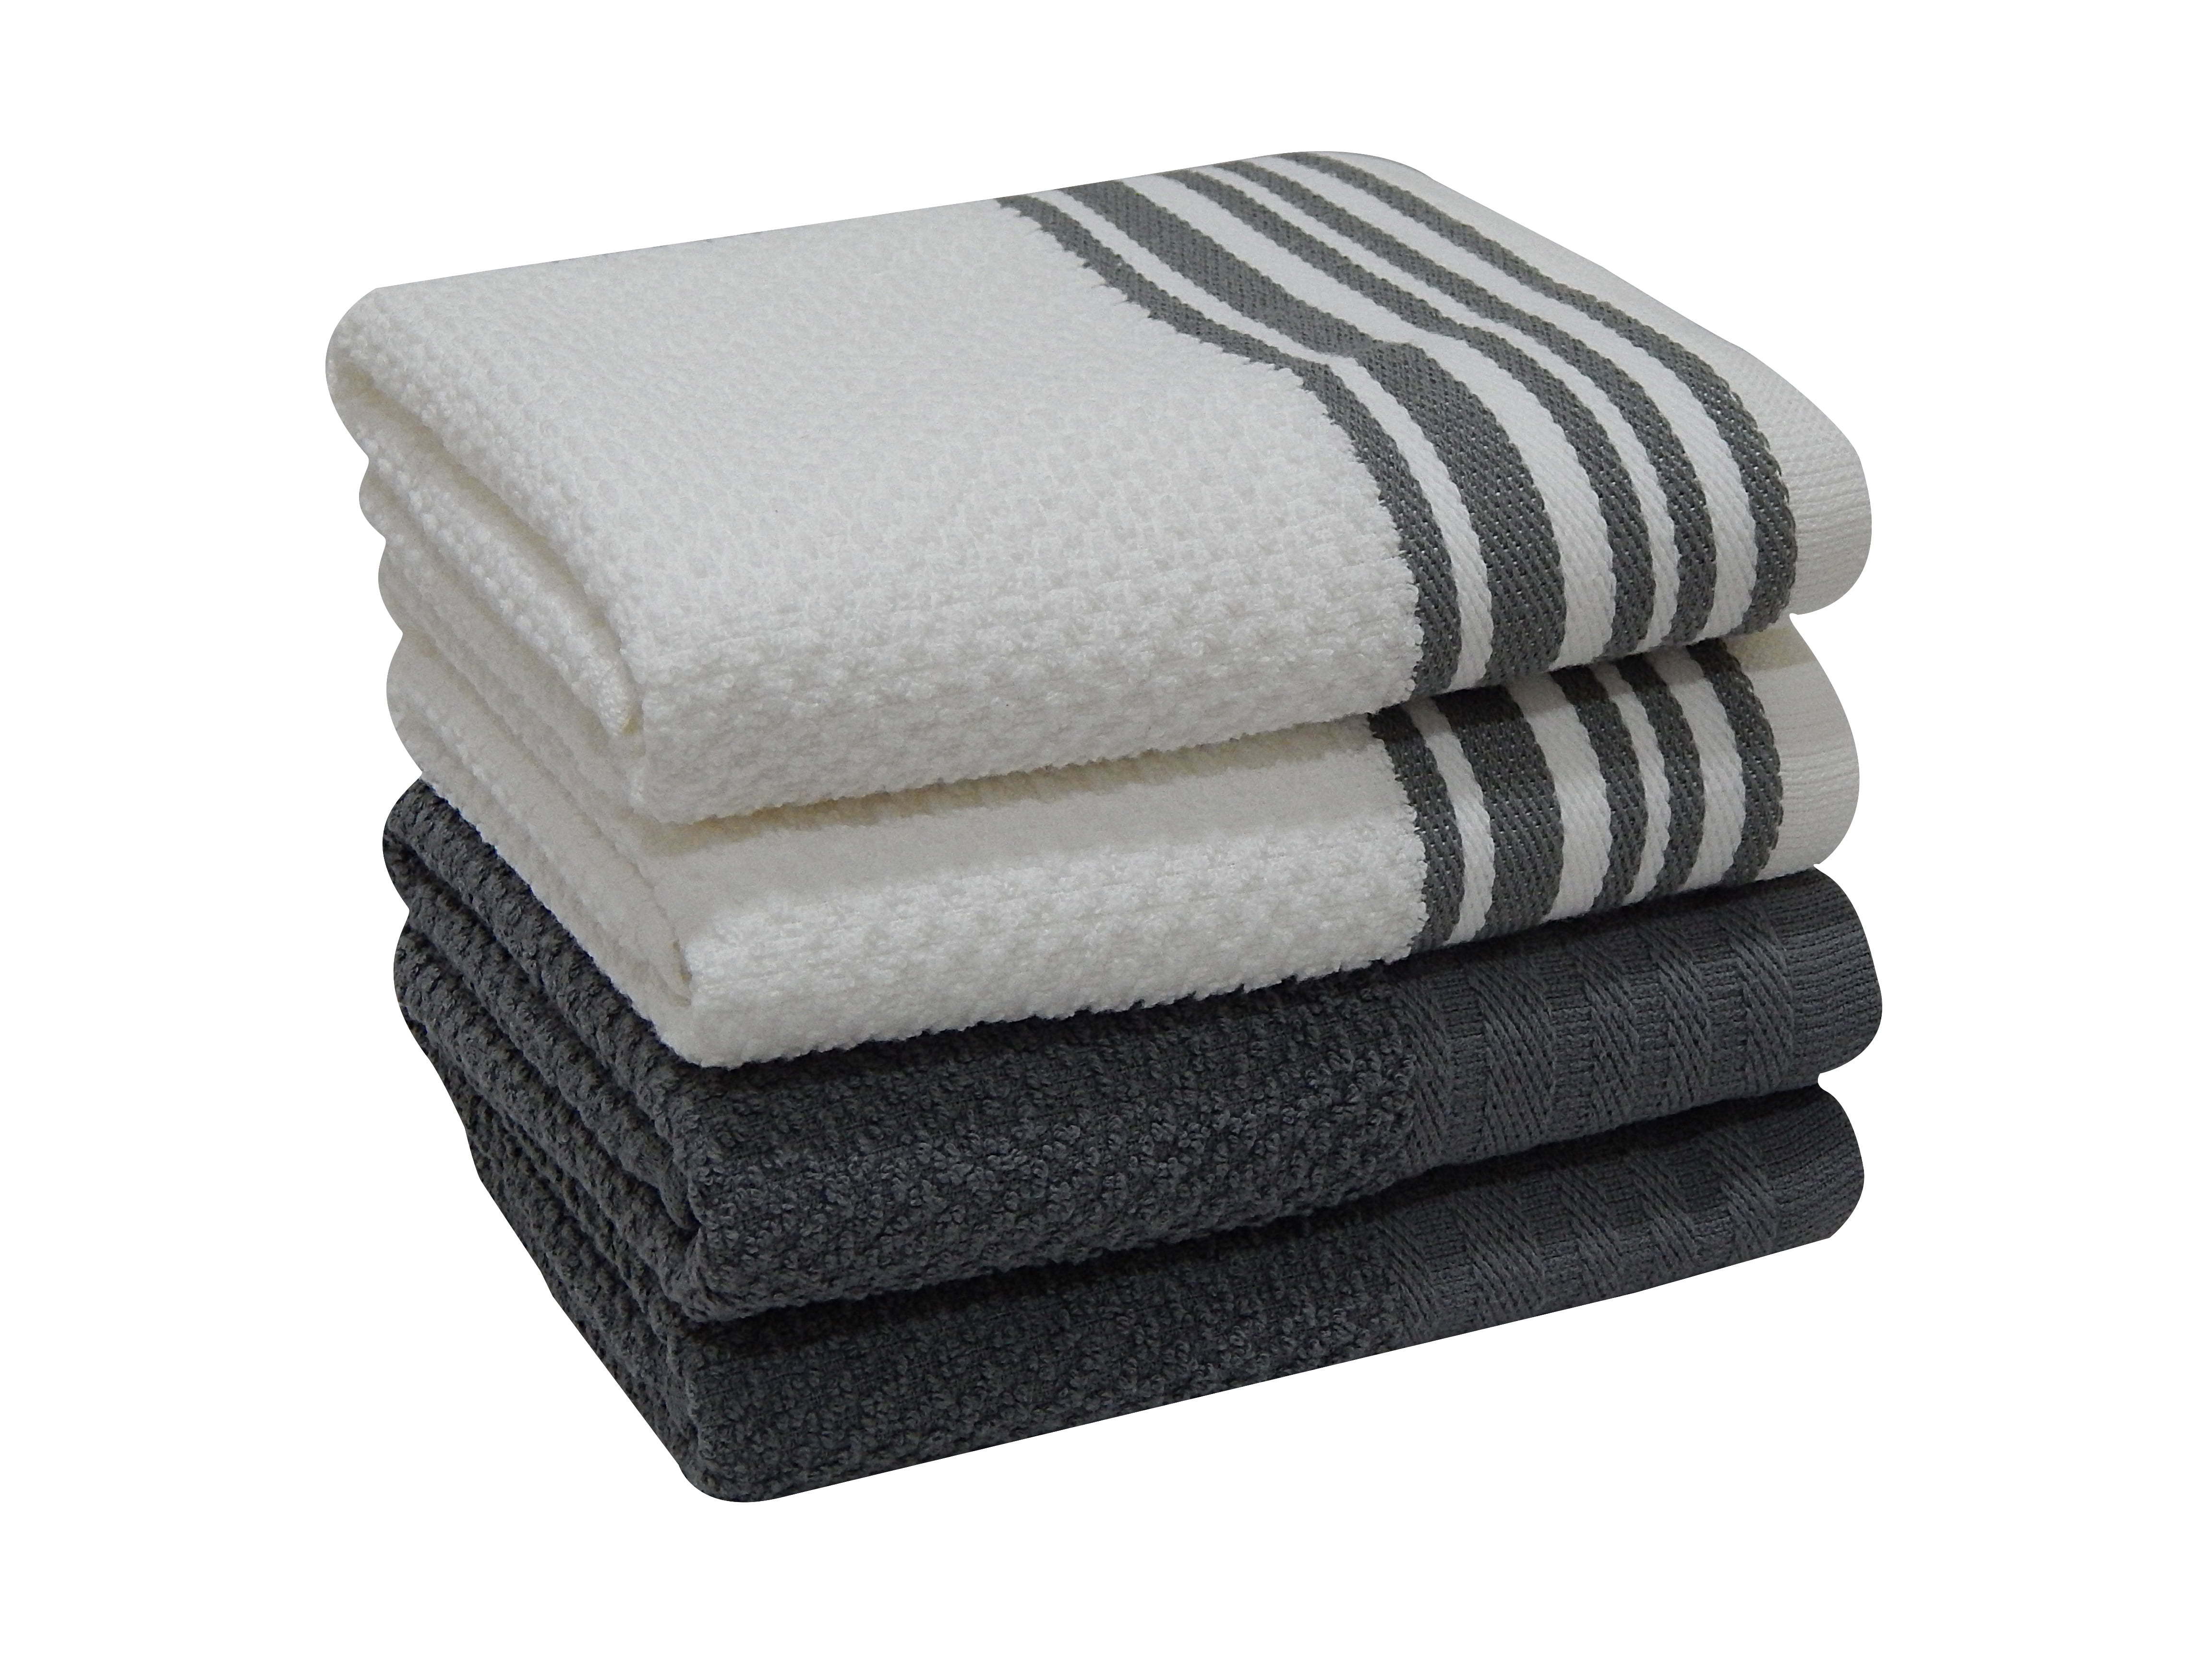 Rustic Dove Gray Checkered 4 Piece Kitchen Towel Set